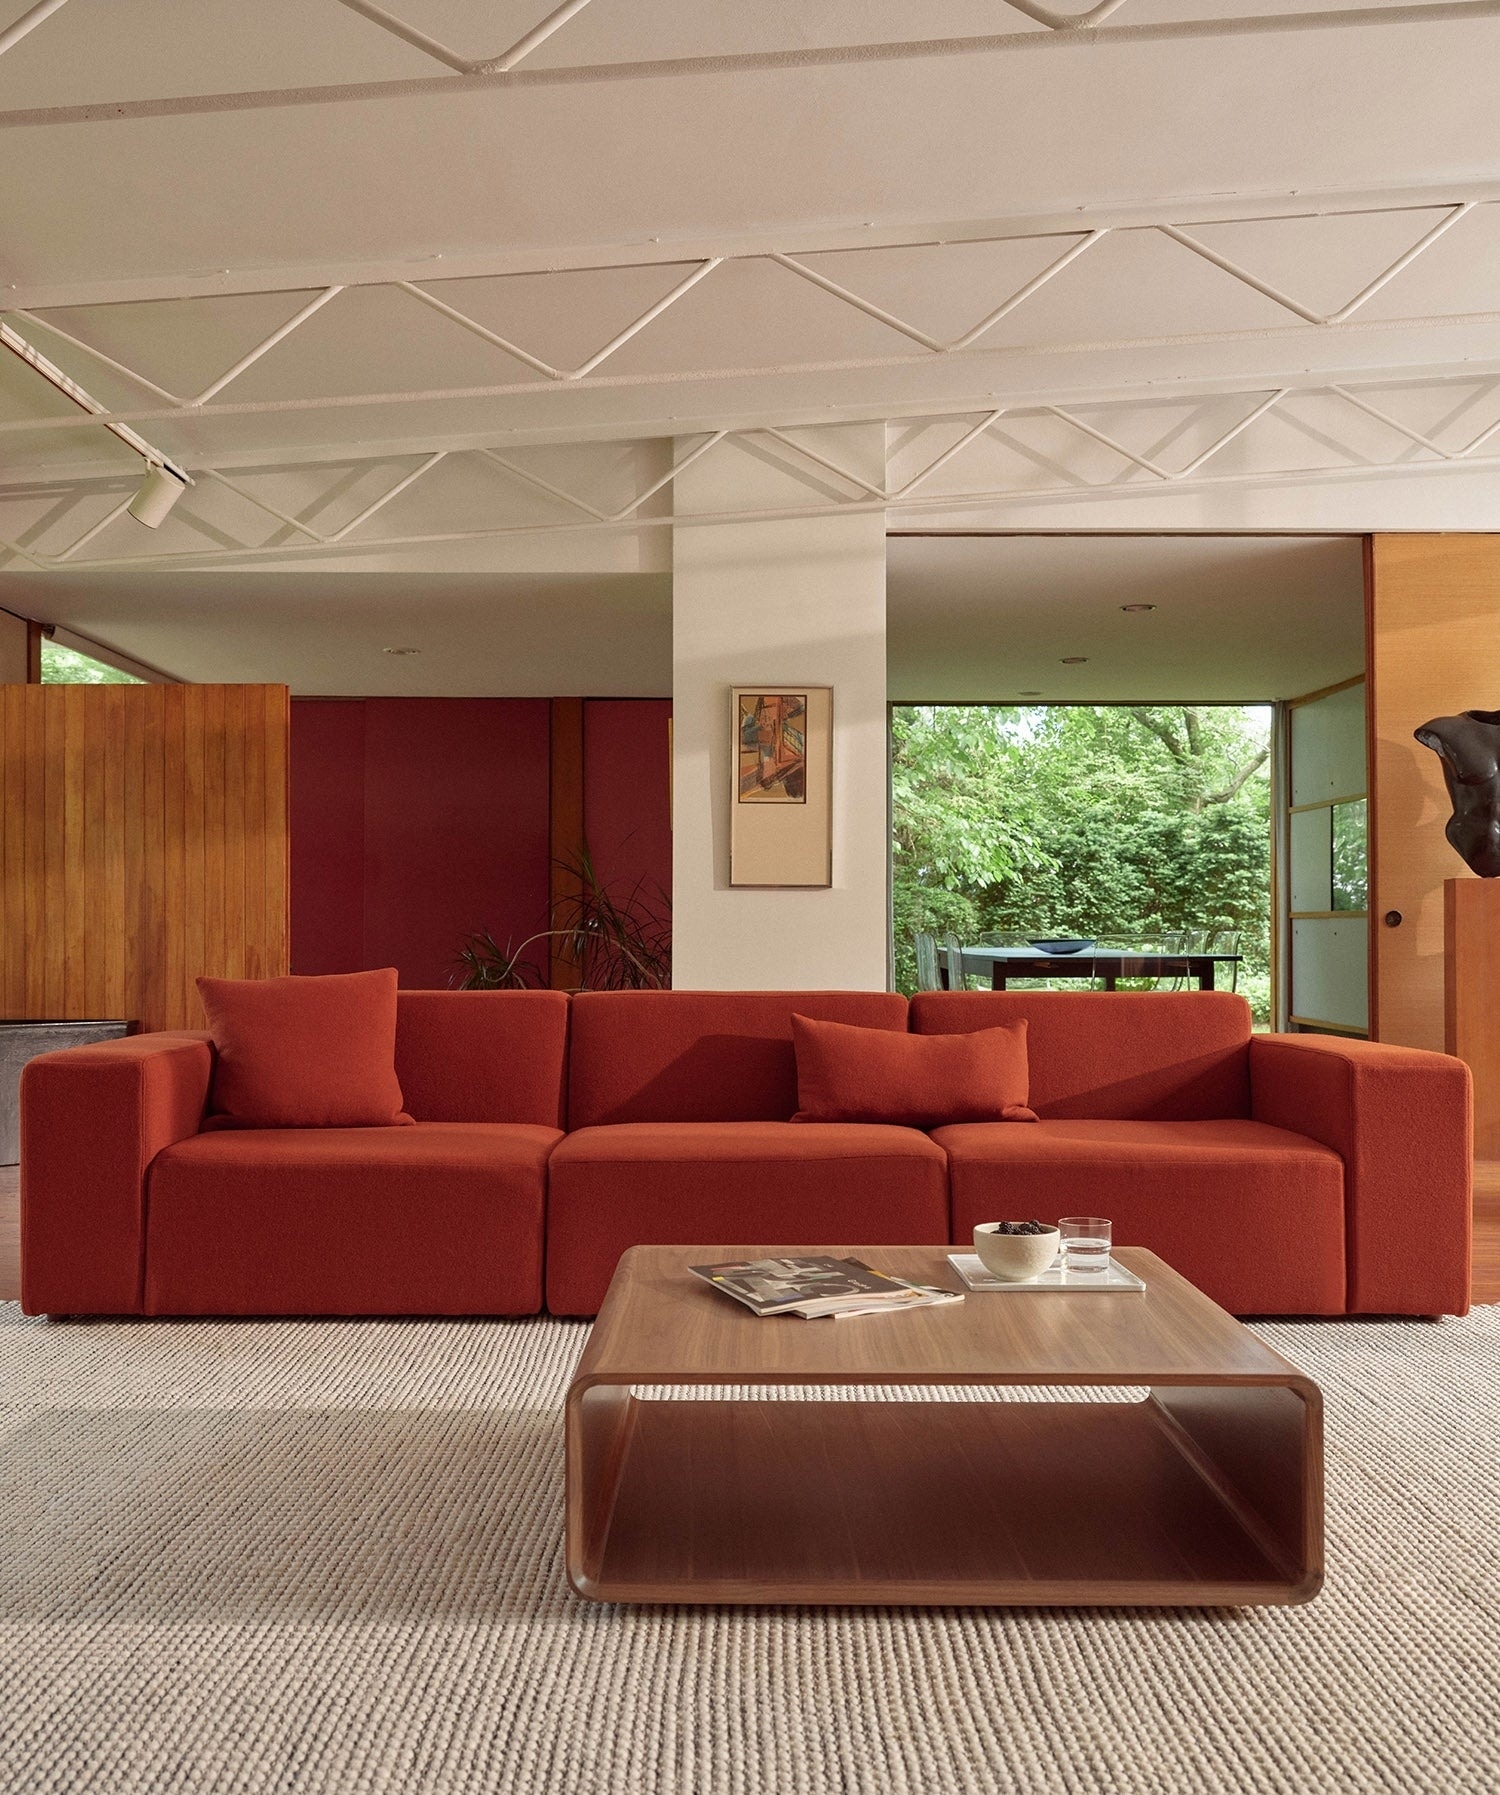 the red sectional